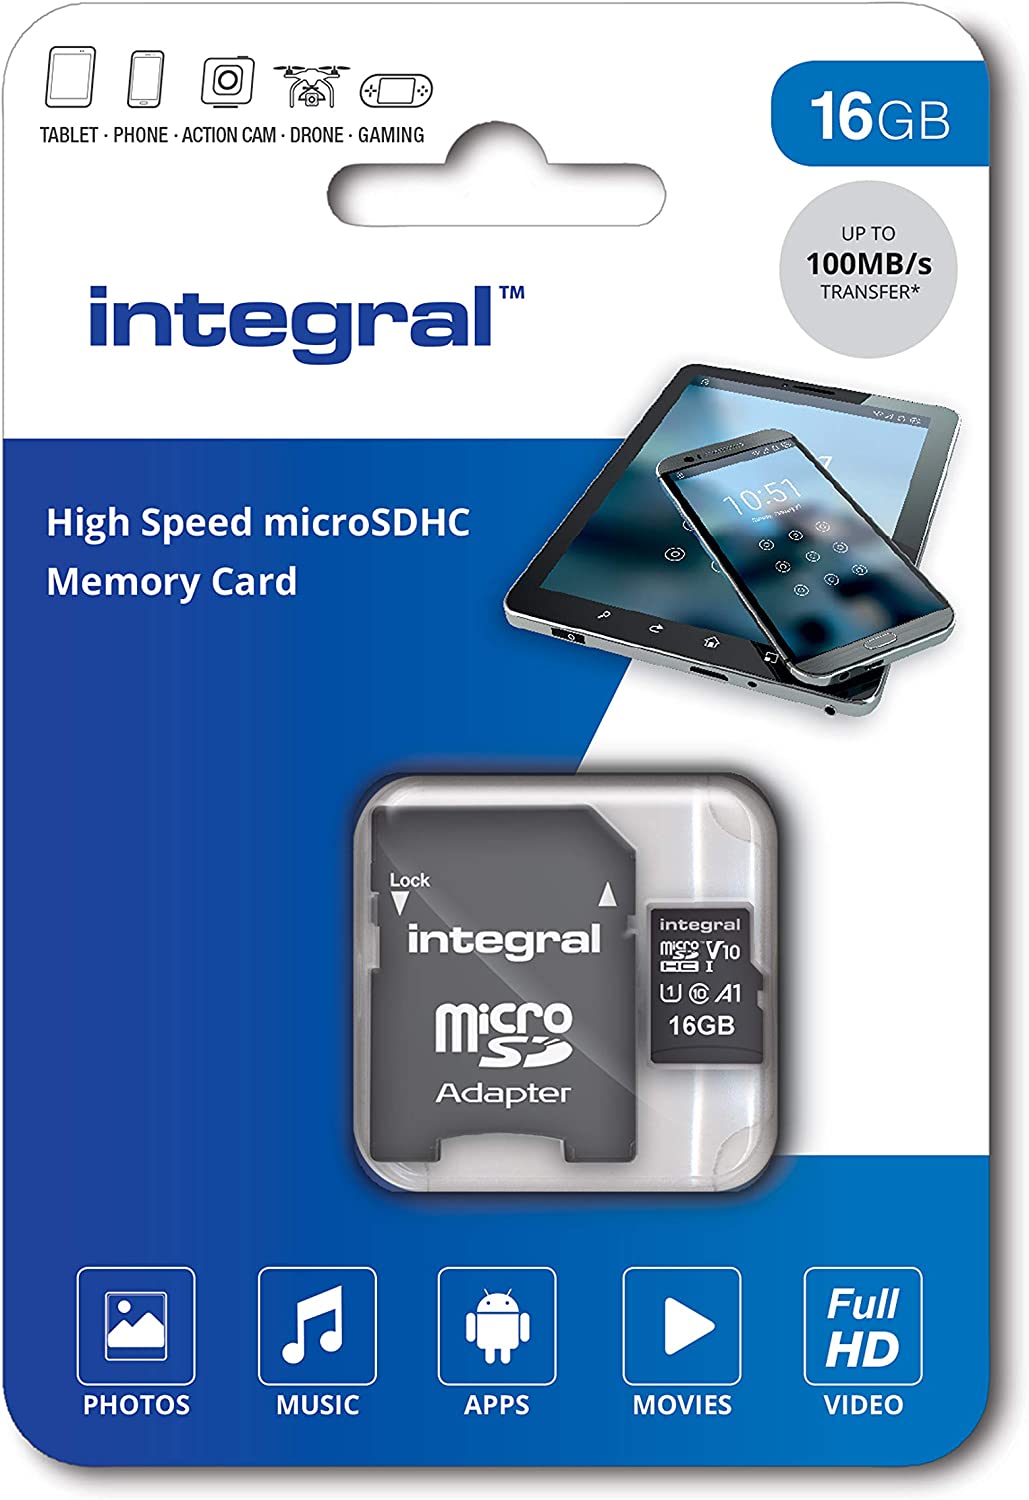 Integral High Speed microSDHC and microSDXC cards are a perfect fit for  your smartphone and tablet. Enjoy more space for photos, videos, music and  apps. 100MB/s* transfer speeds allow fast data transfer